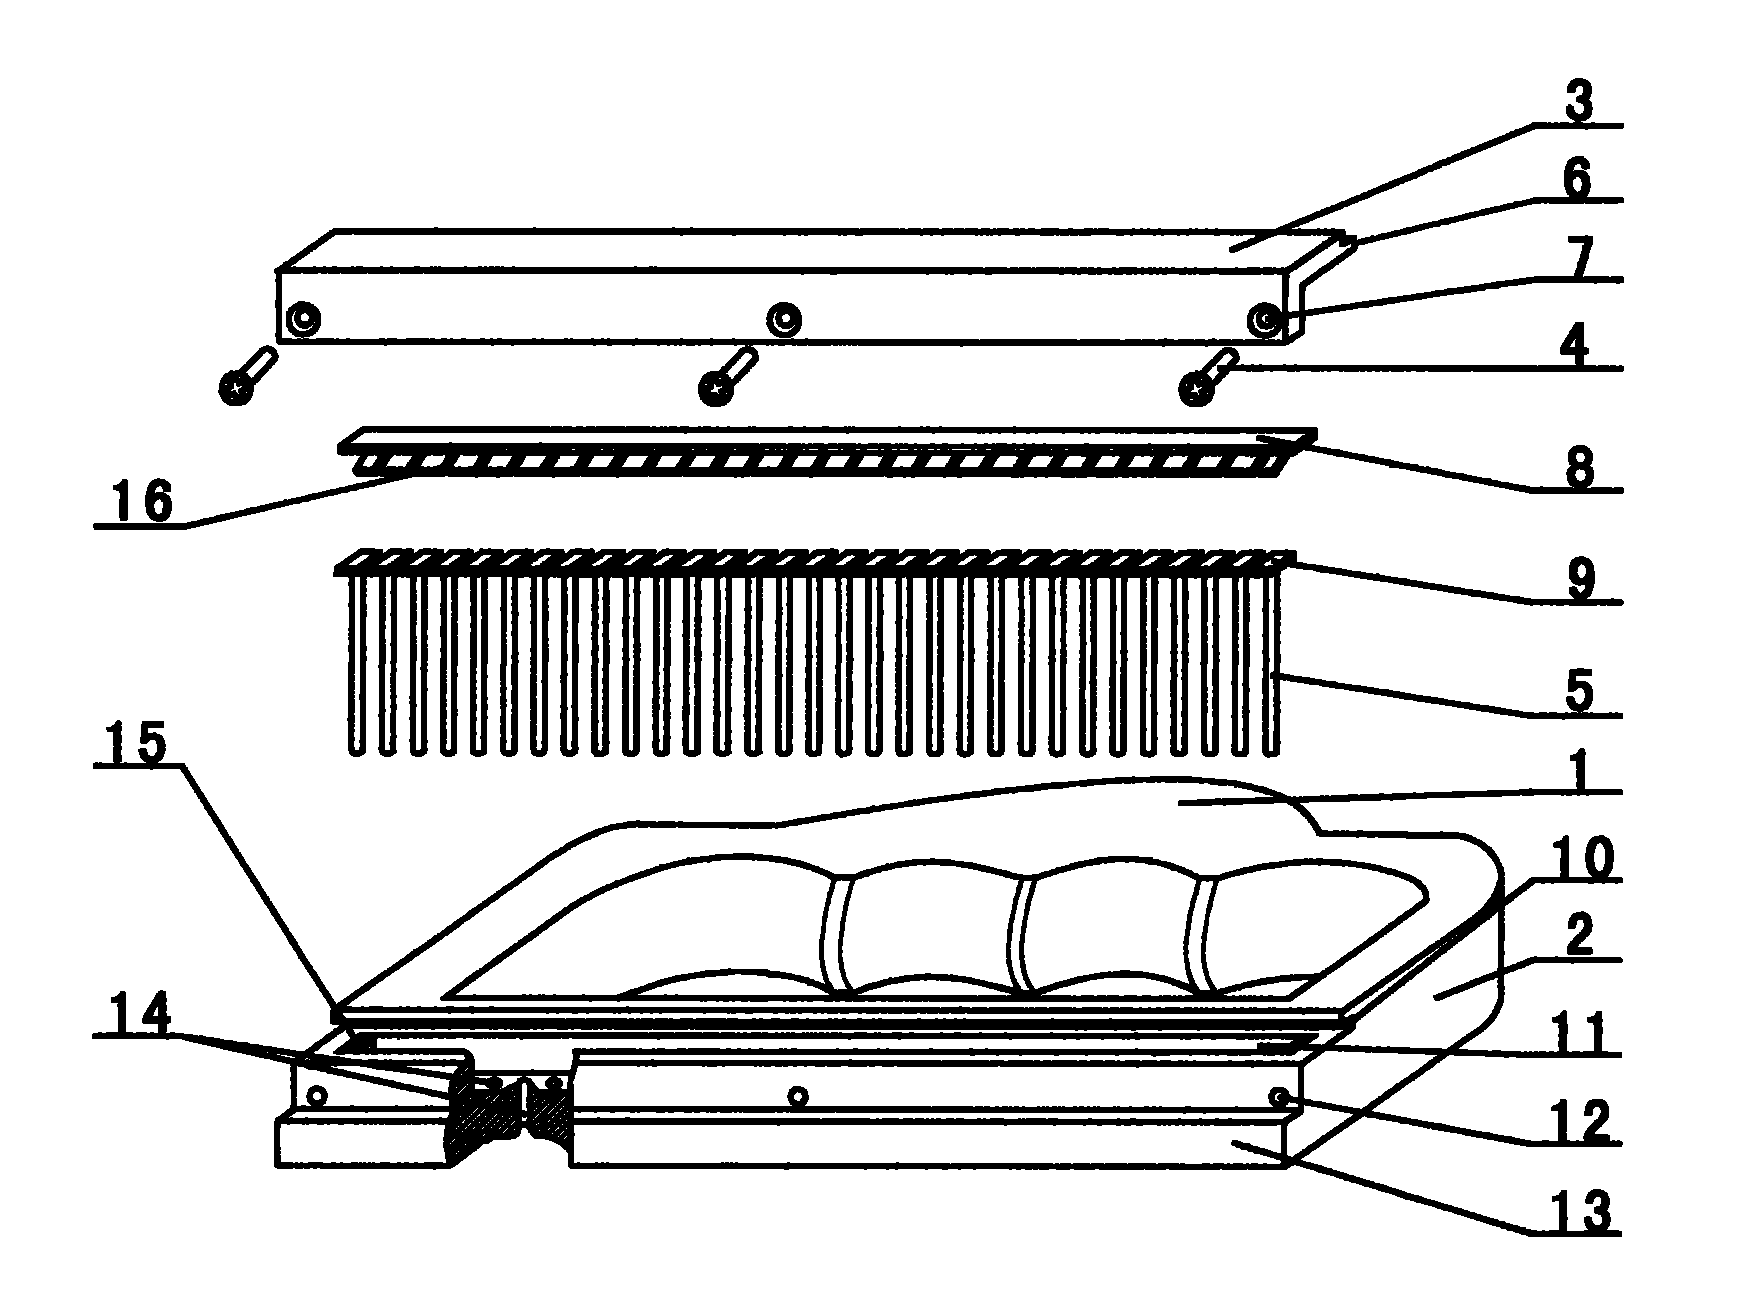 Hair-washing comb capable of automatically adjusting length of comb